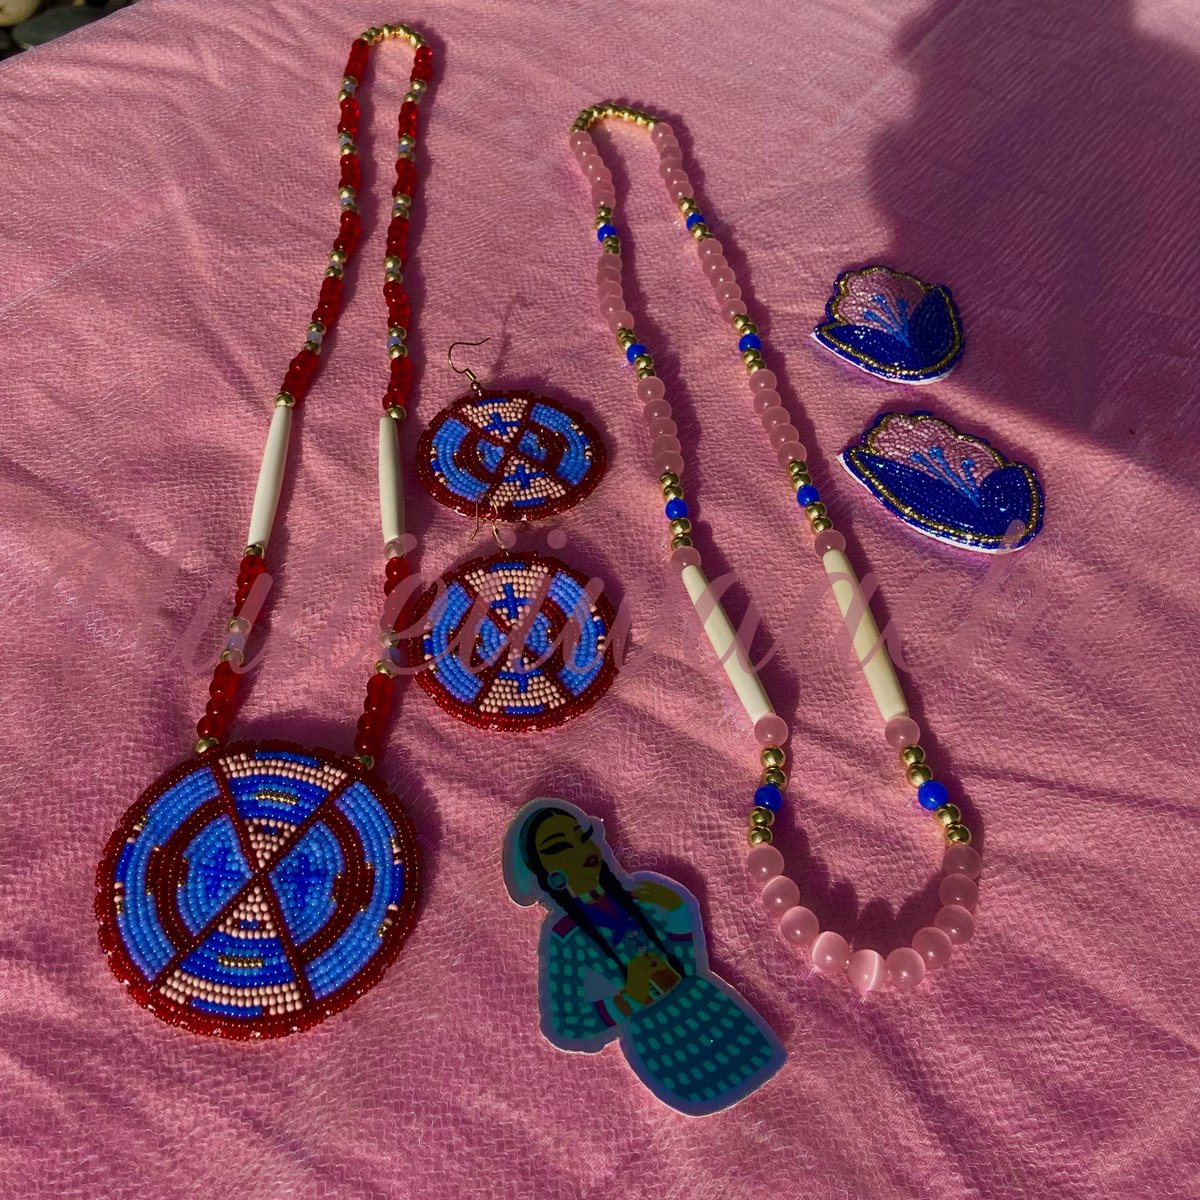 I have these two sets available 🤭💗